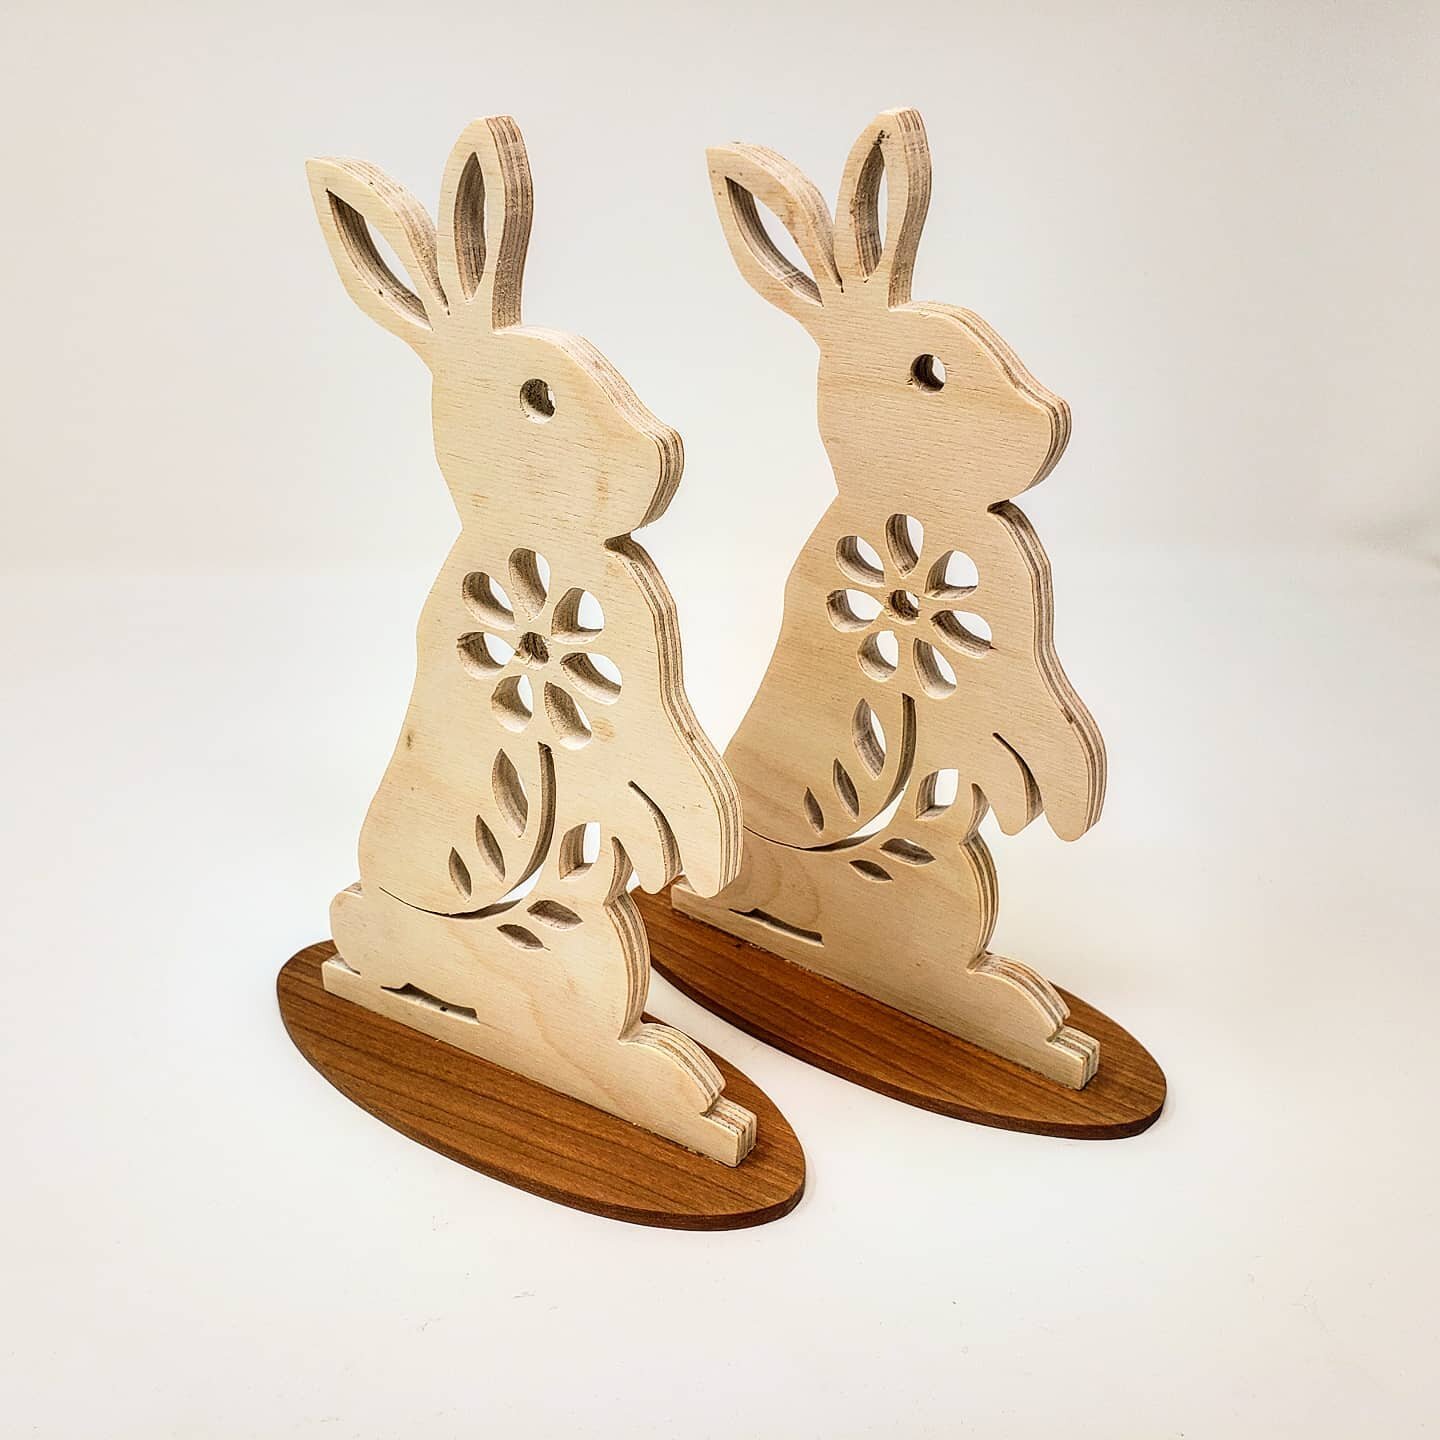 Happy Easter!! You can buy these handmade bunnies and much more by checking out @CoastalCraftCircuit here or on #Etsy today! .
.
.
.
#woodworking #woodisgood #art #carving #bunny #bunniesofinstagram #finewoodworking #custom #easter #easterdecor #coas